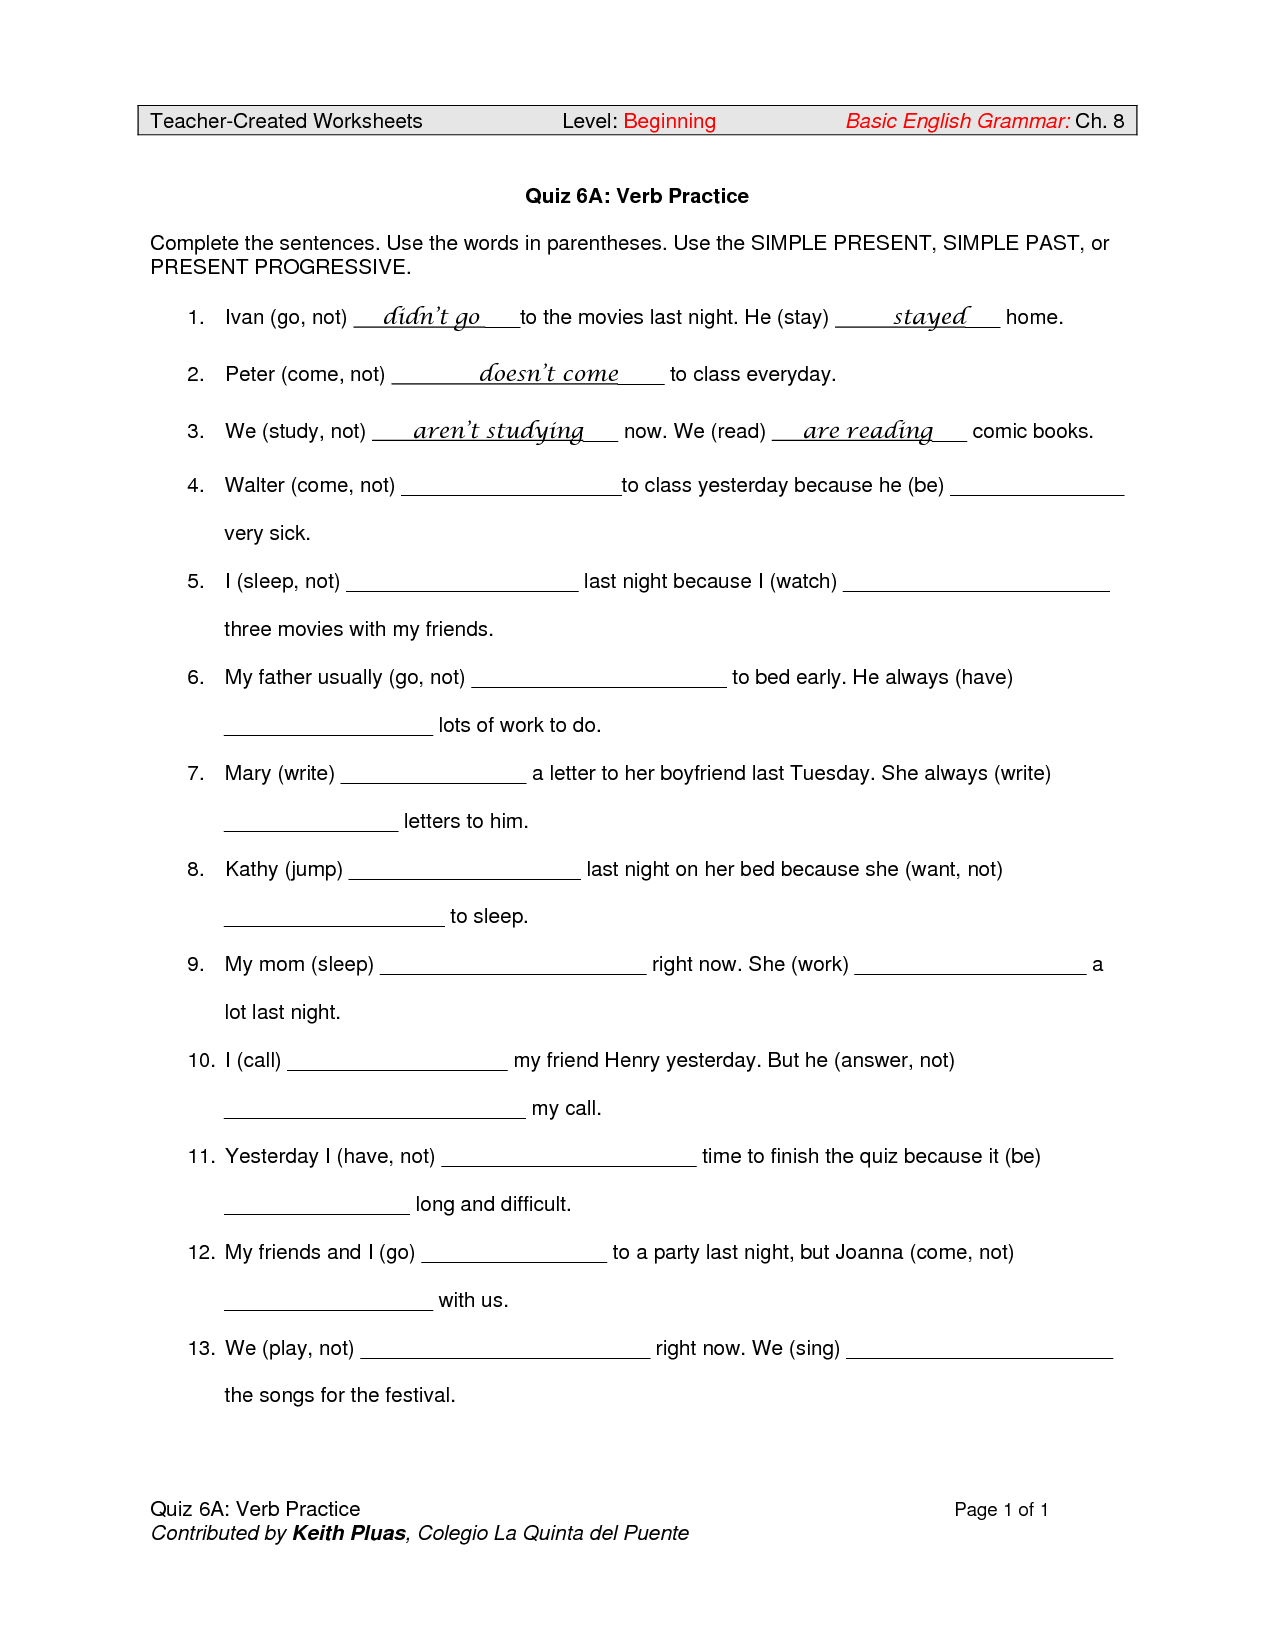 Simple Past and Present Worksheets Image